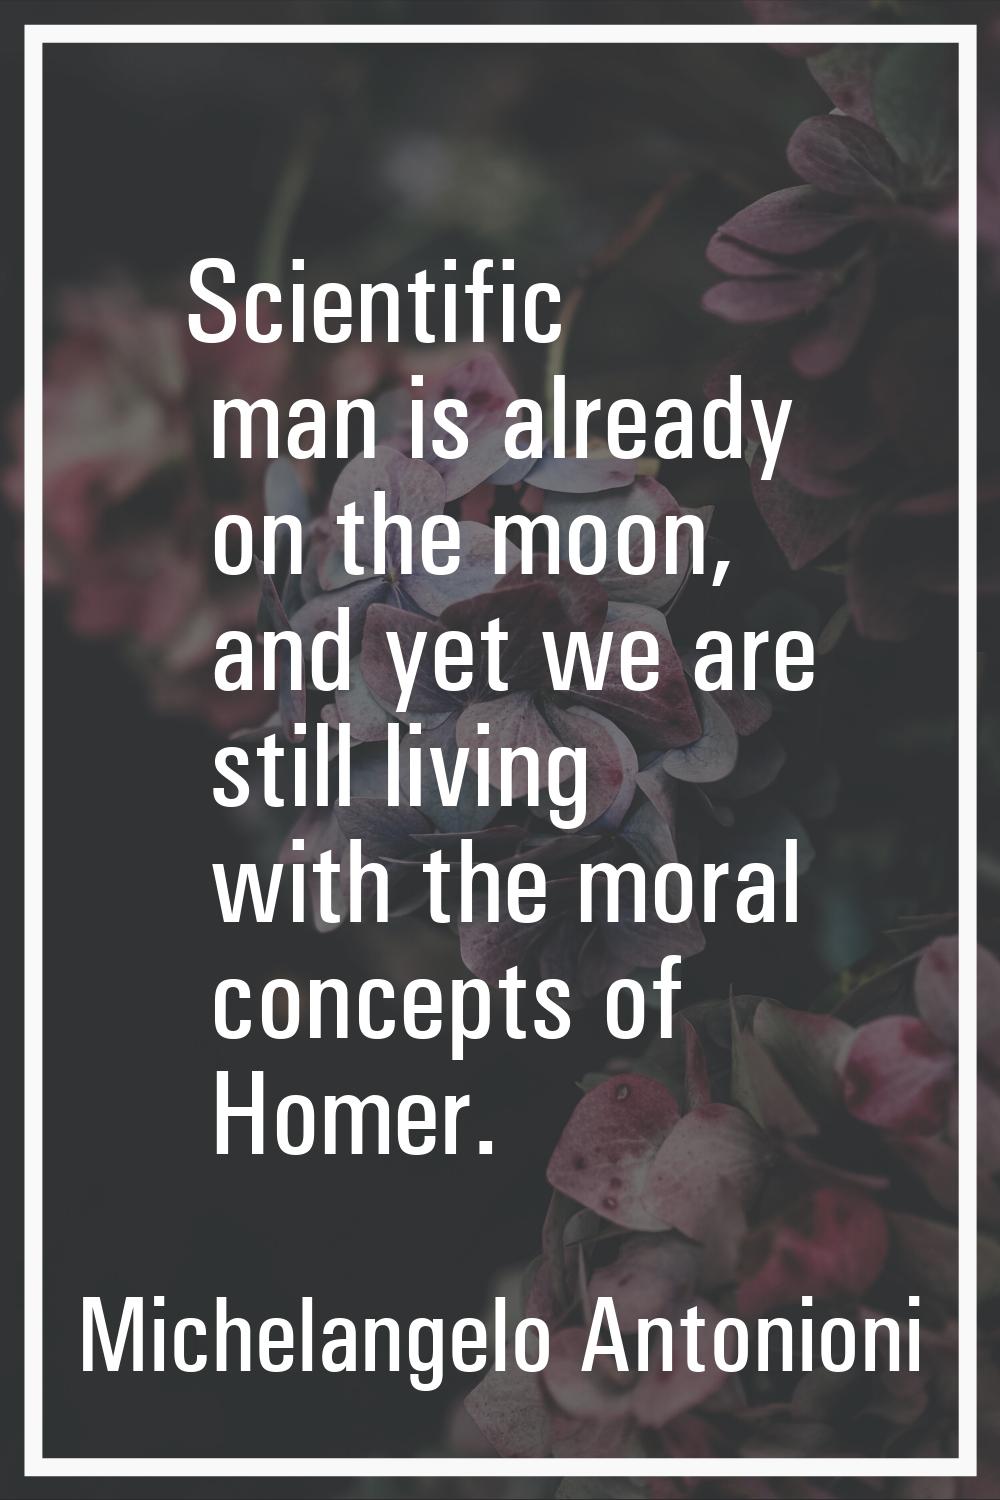 Scientific man is already on the moon, and yet we are still living with the moral concepts of Homer